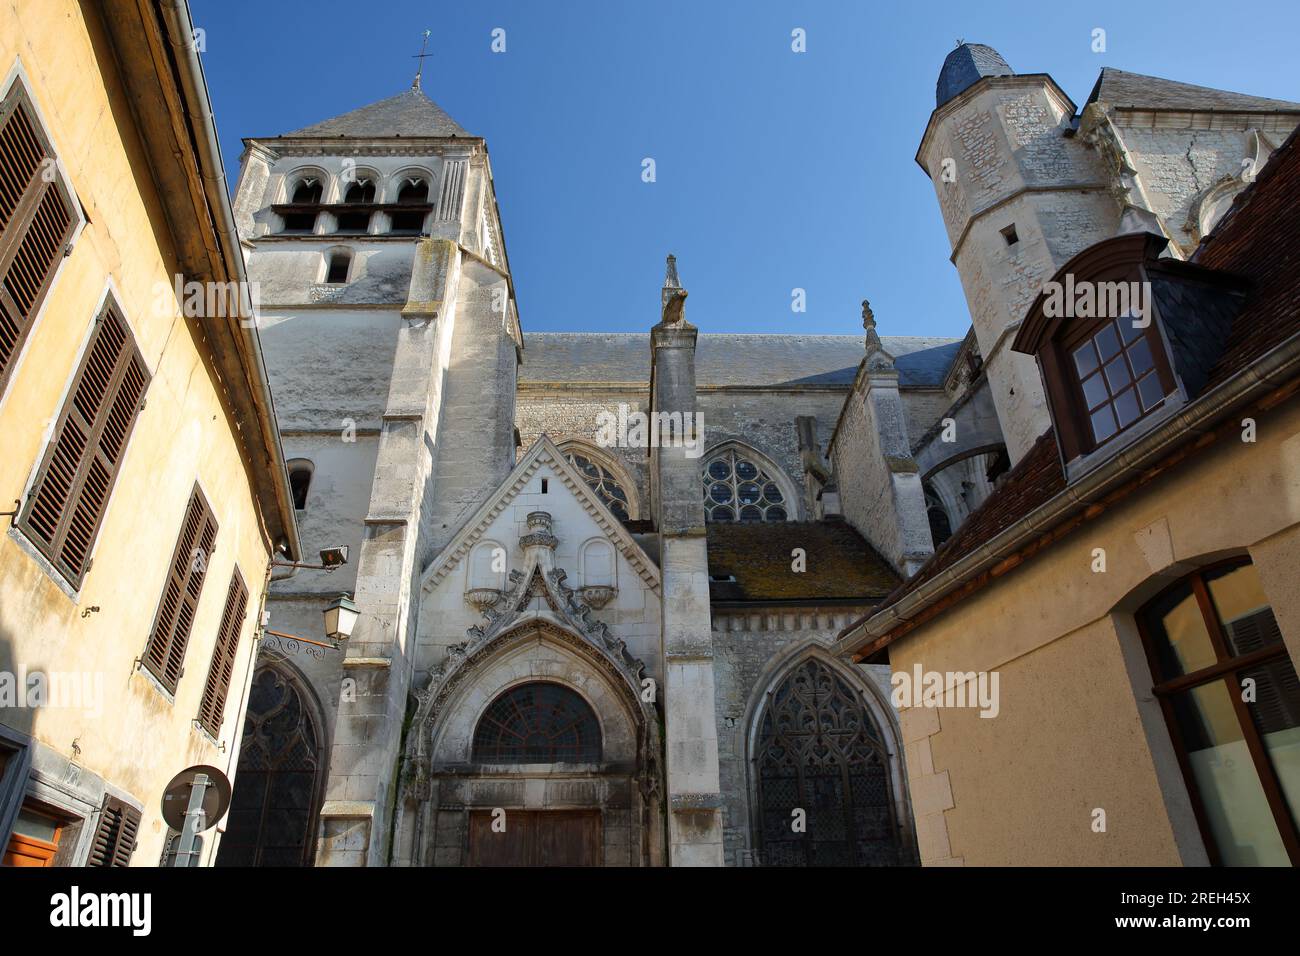 The external facade of Saint Etienne church in Bar sur Seine, Aube, Grand Est, champagne ardenne, France, with gothic architecture Stock Photo